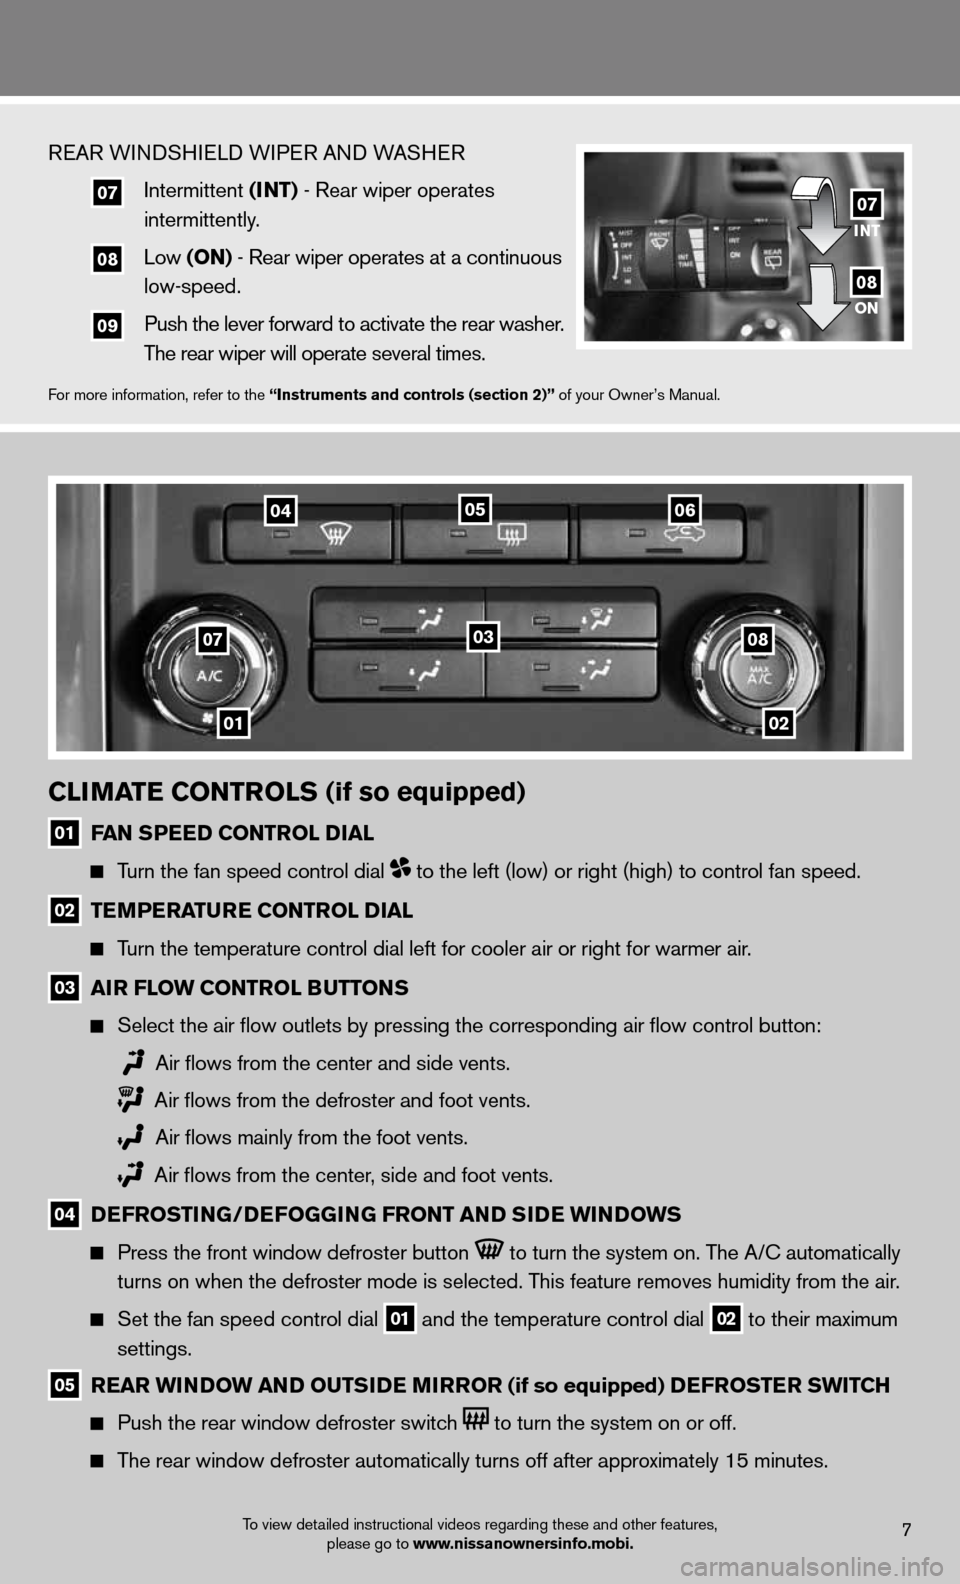 NISSAN XTERRA 2012 N50 / 2.G Quick Reference Guide 01
07
02
08
04
03
0506
ClimatE Controls (if so equipped)
01 fan s
PEED Control D ial
  
  Turn the fan speed control dial  to the left (low) or right (high) to control fan speed.  
02 tE
mPE ratur E C